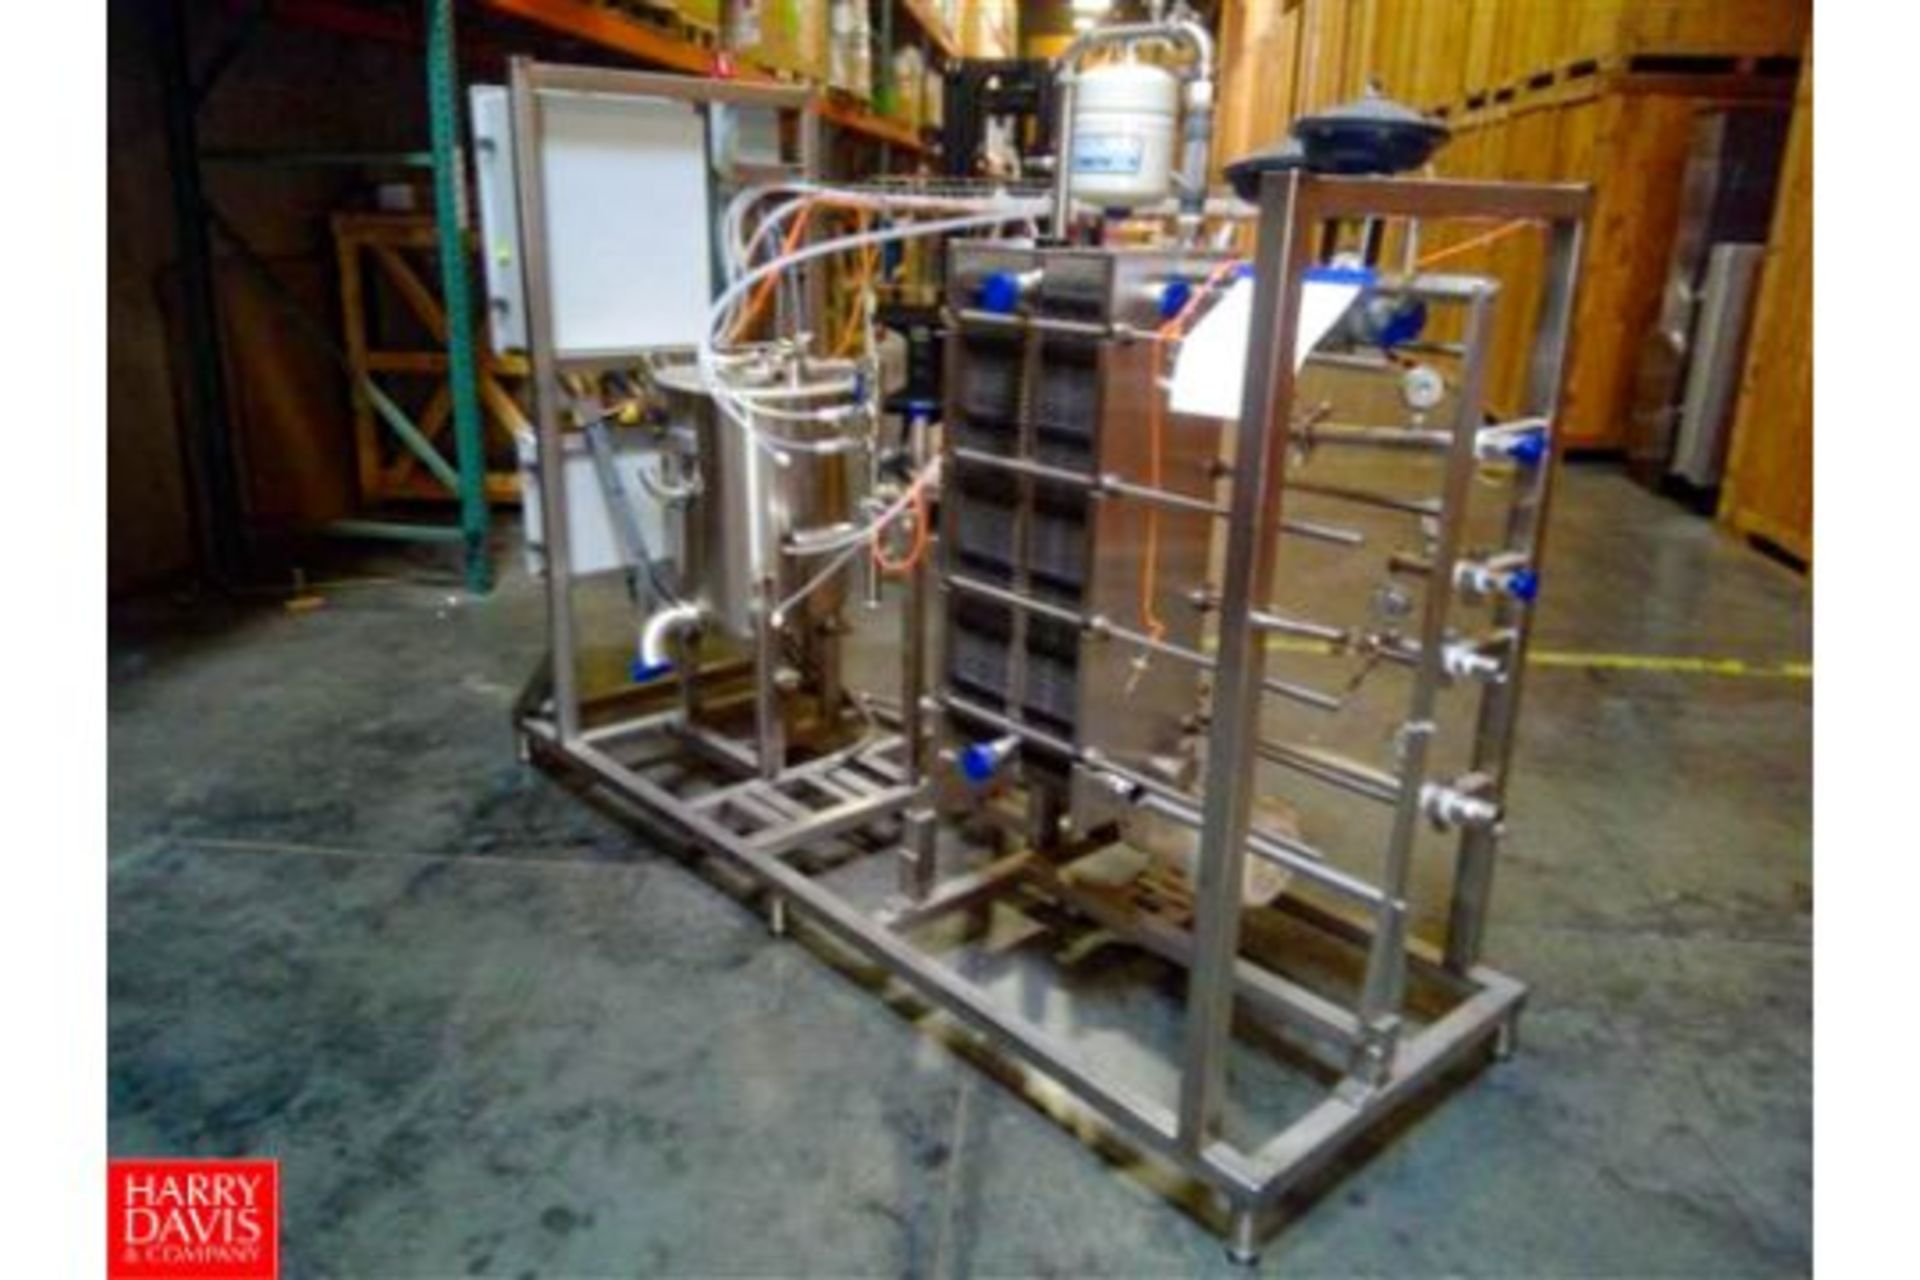 Sondex Thermaline 10 GPM Pasteurization Skid Including S/S Frame Plate Heat Exchanger, S/S Balance